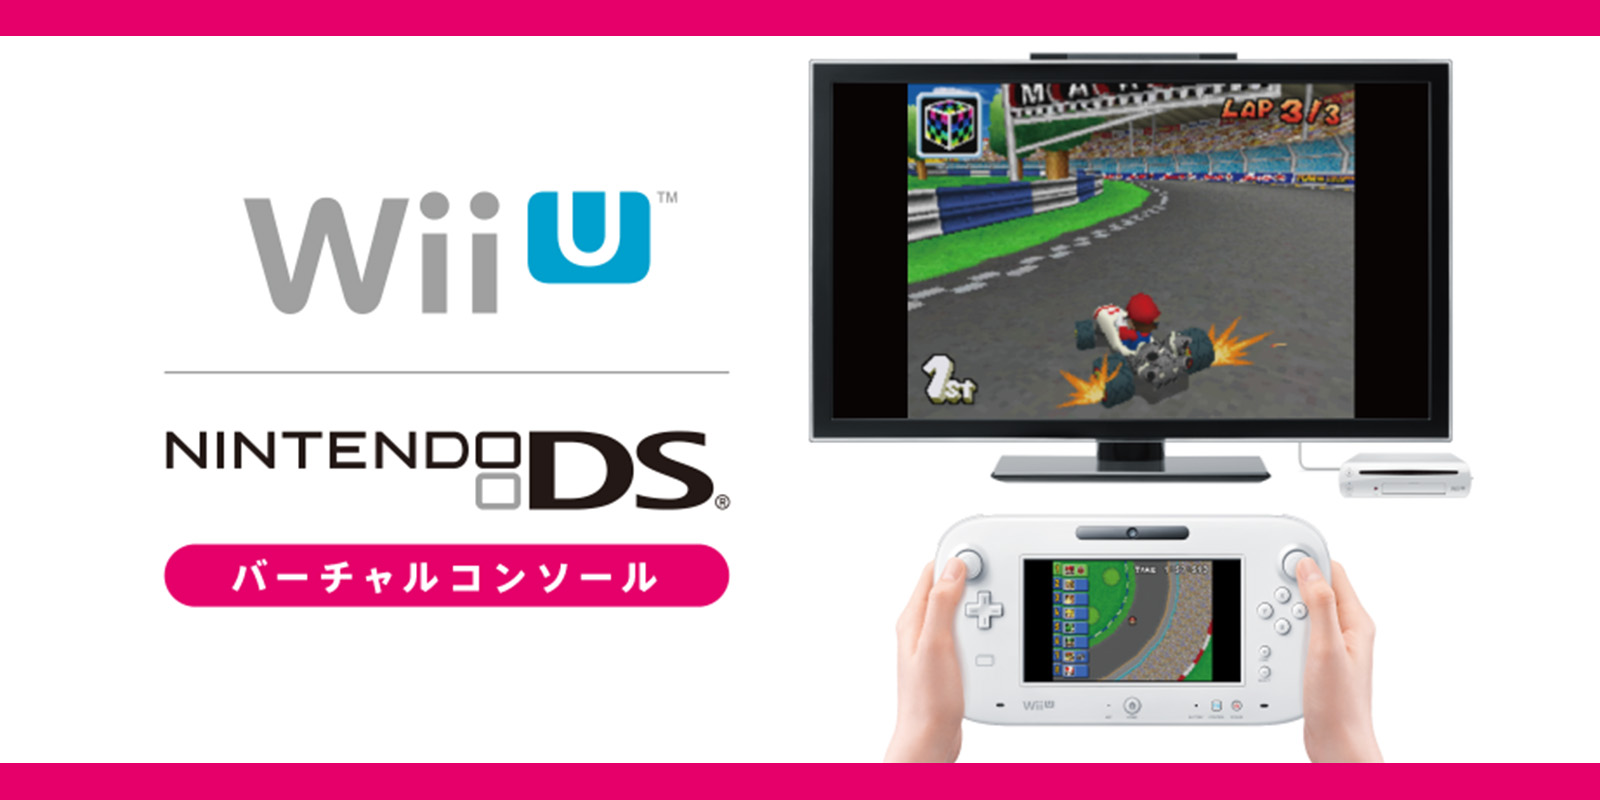 10 Wii U Virtual Console Titles Worth Checking Out Before the